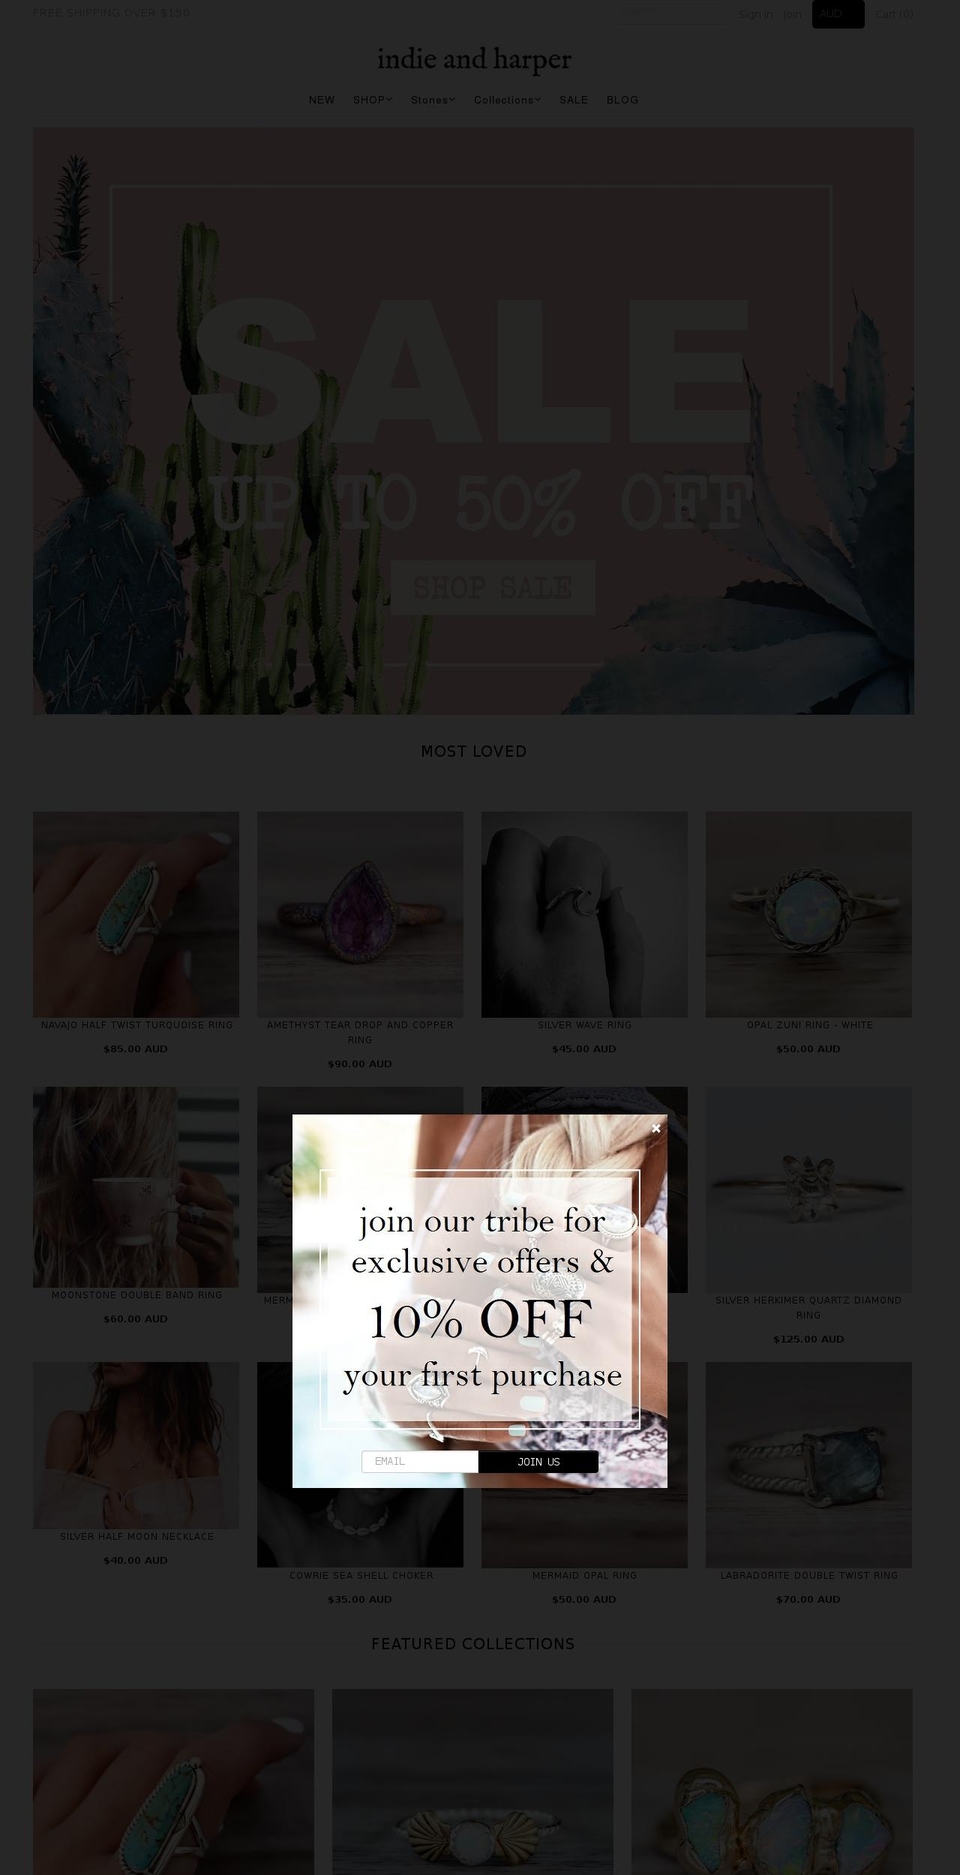 Broadcast Shopify theme site example indieandharper.com